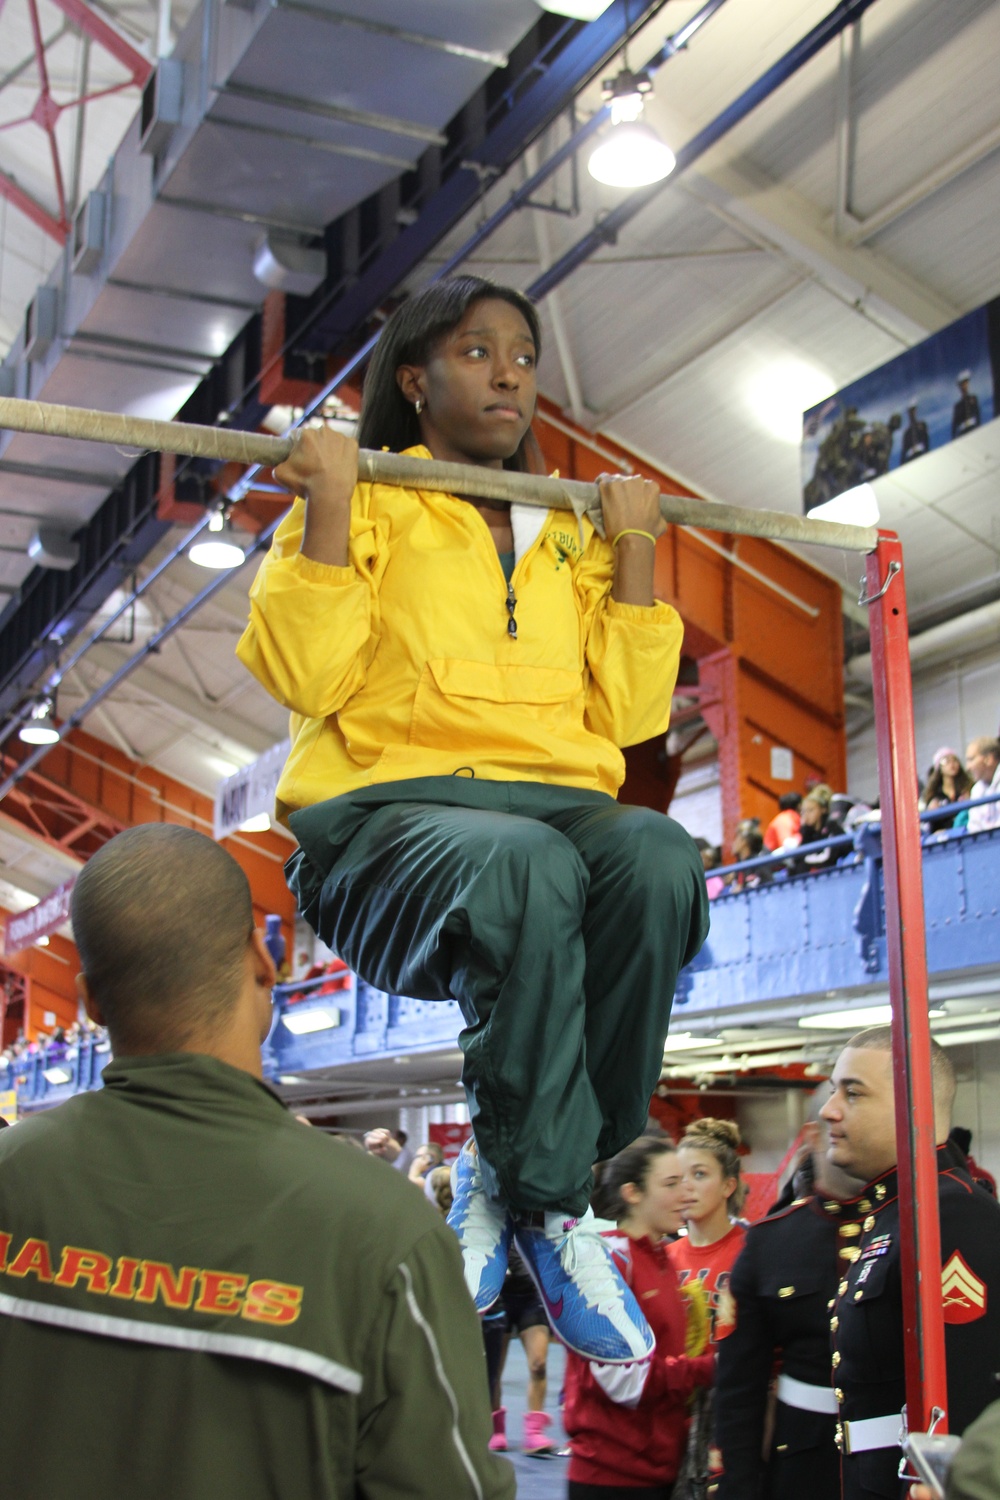 Armory hosts annual Marine Corps Holiday Classic track meet